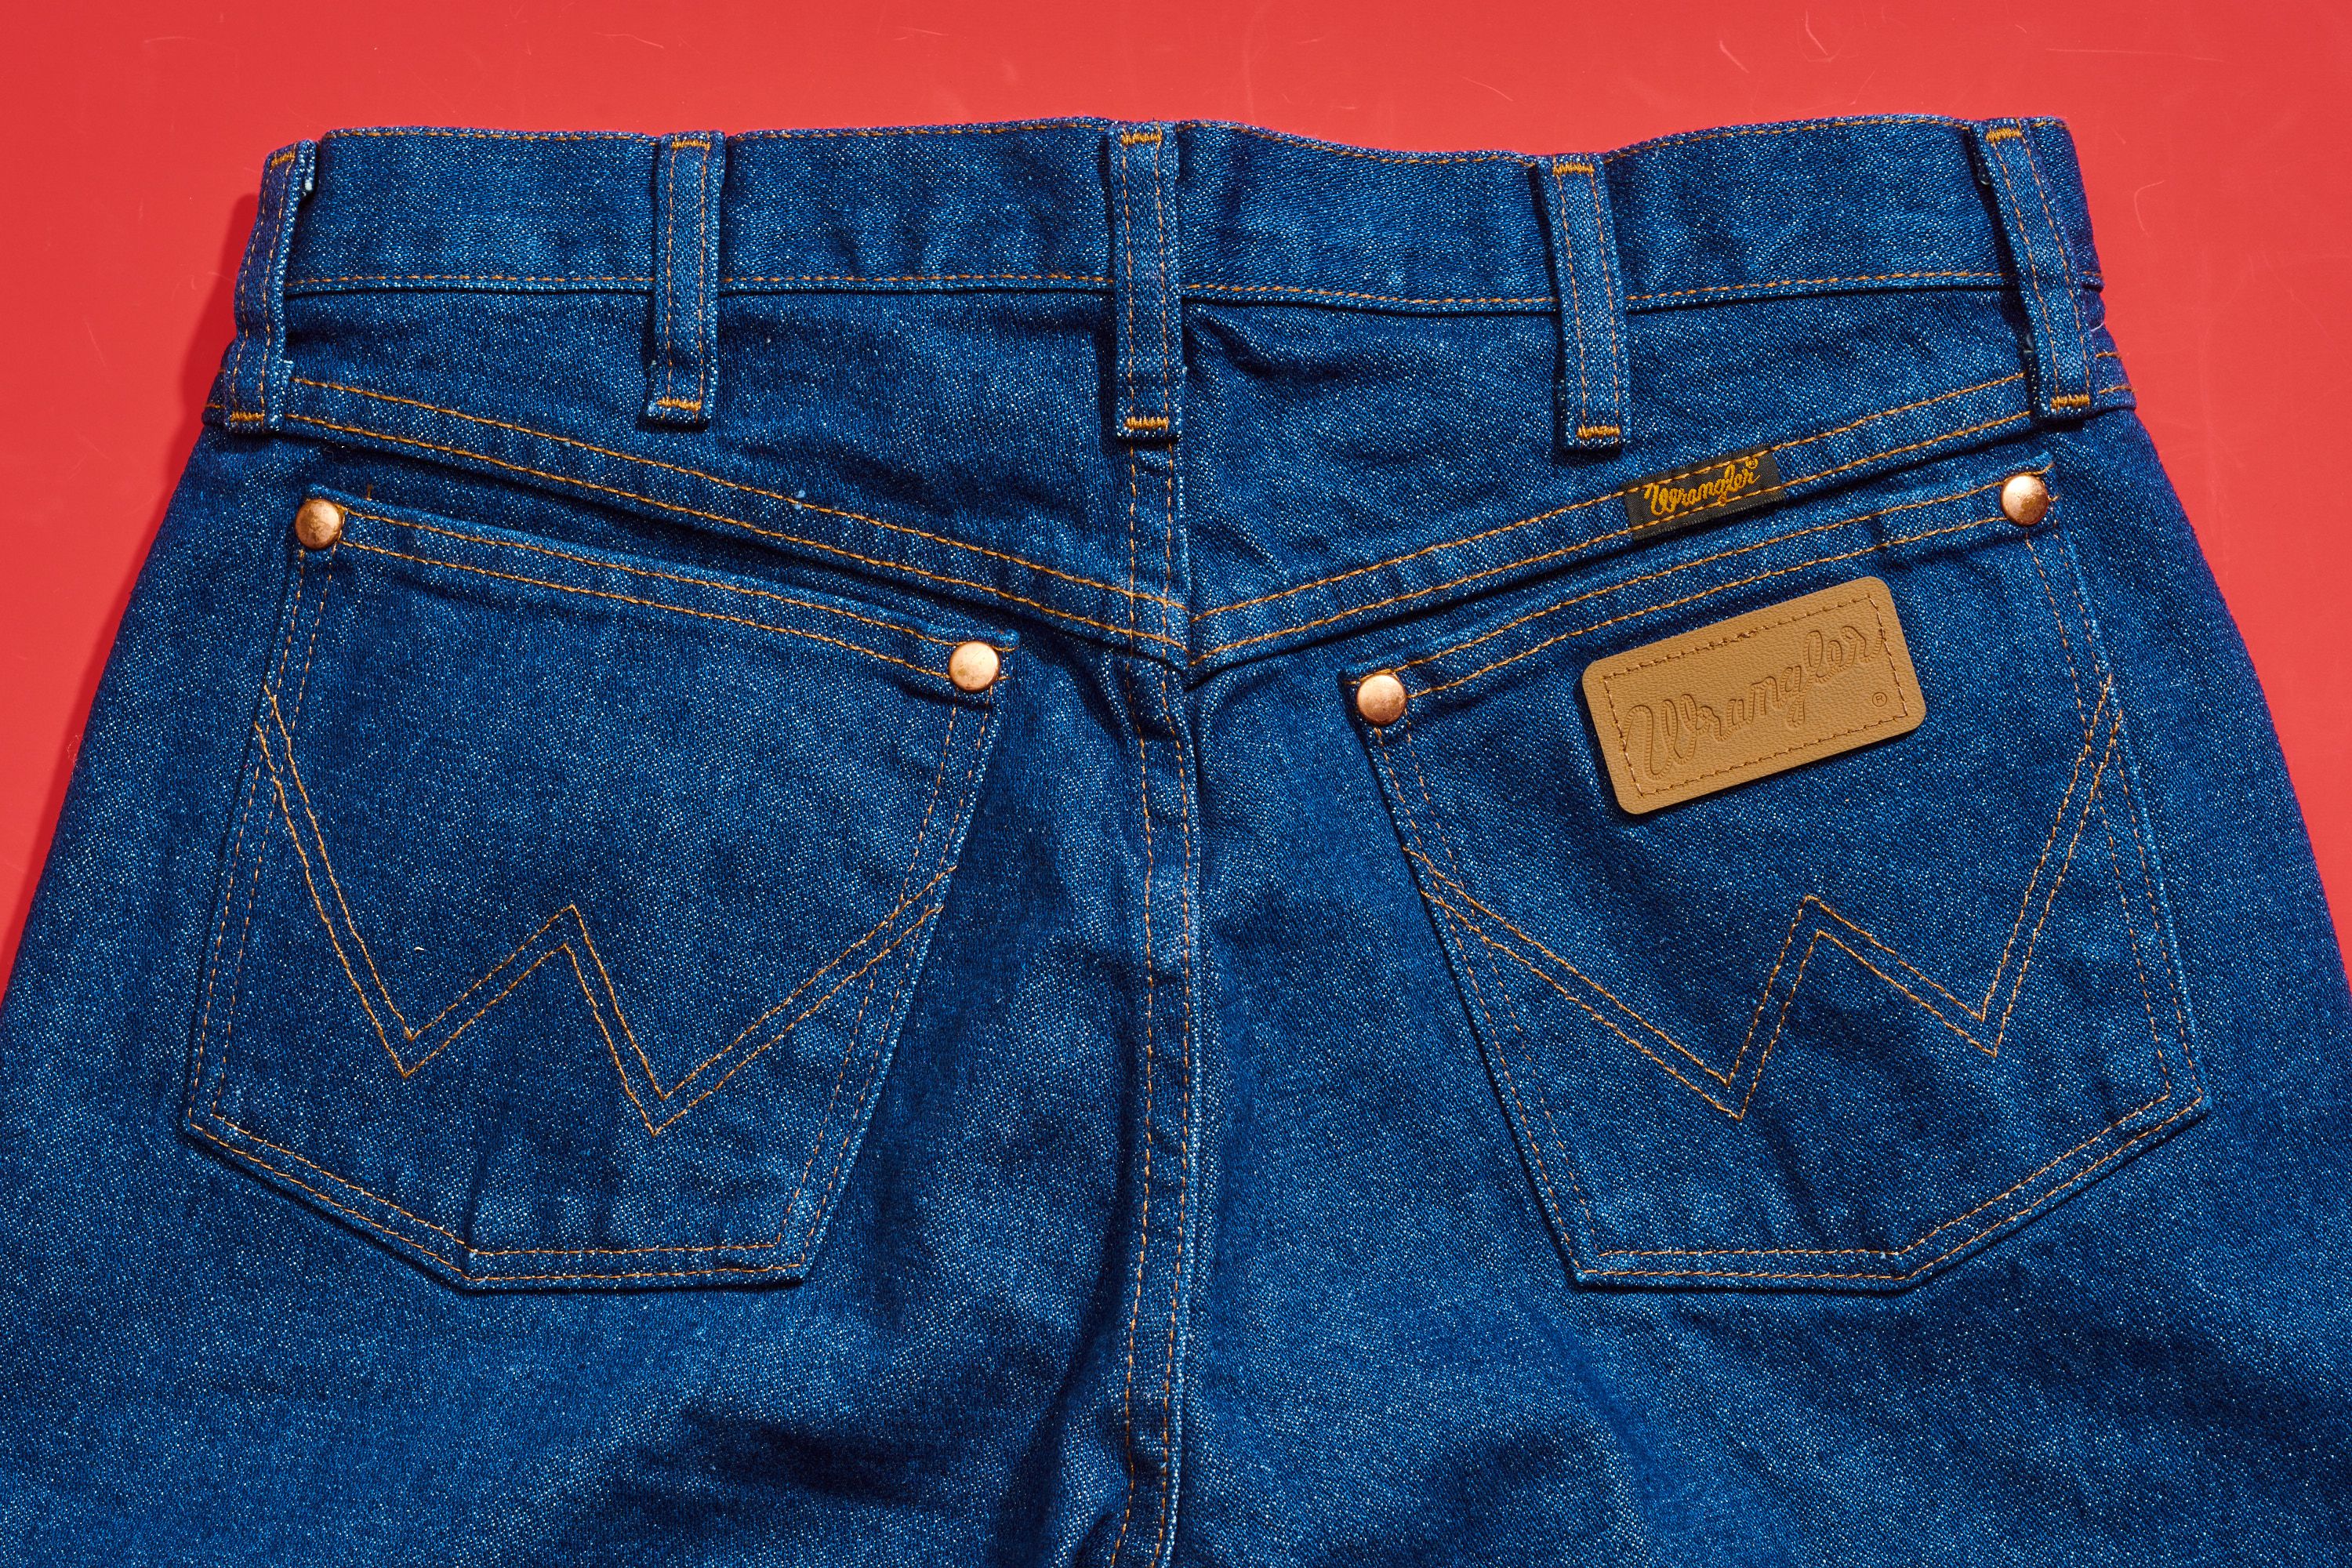 My Honest Review of Five Pairs of Blue Jeans / Denim Under $100